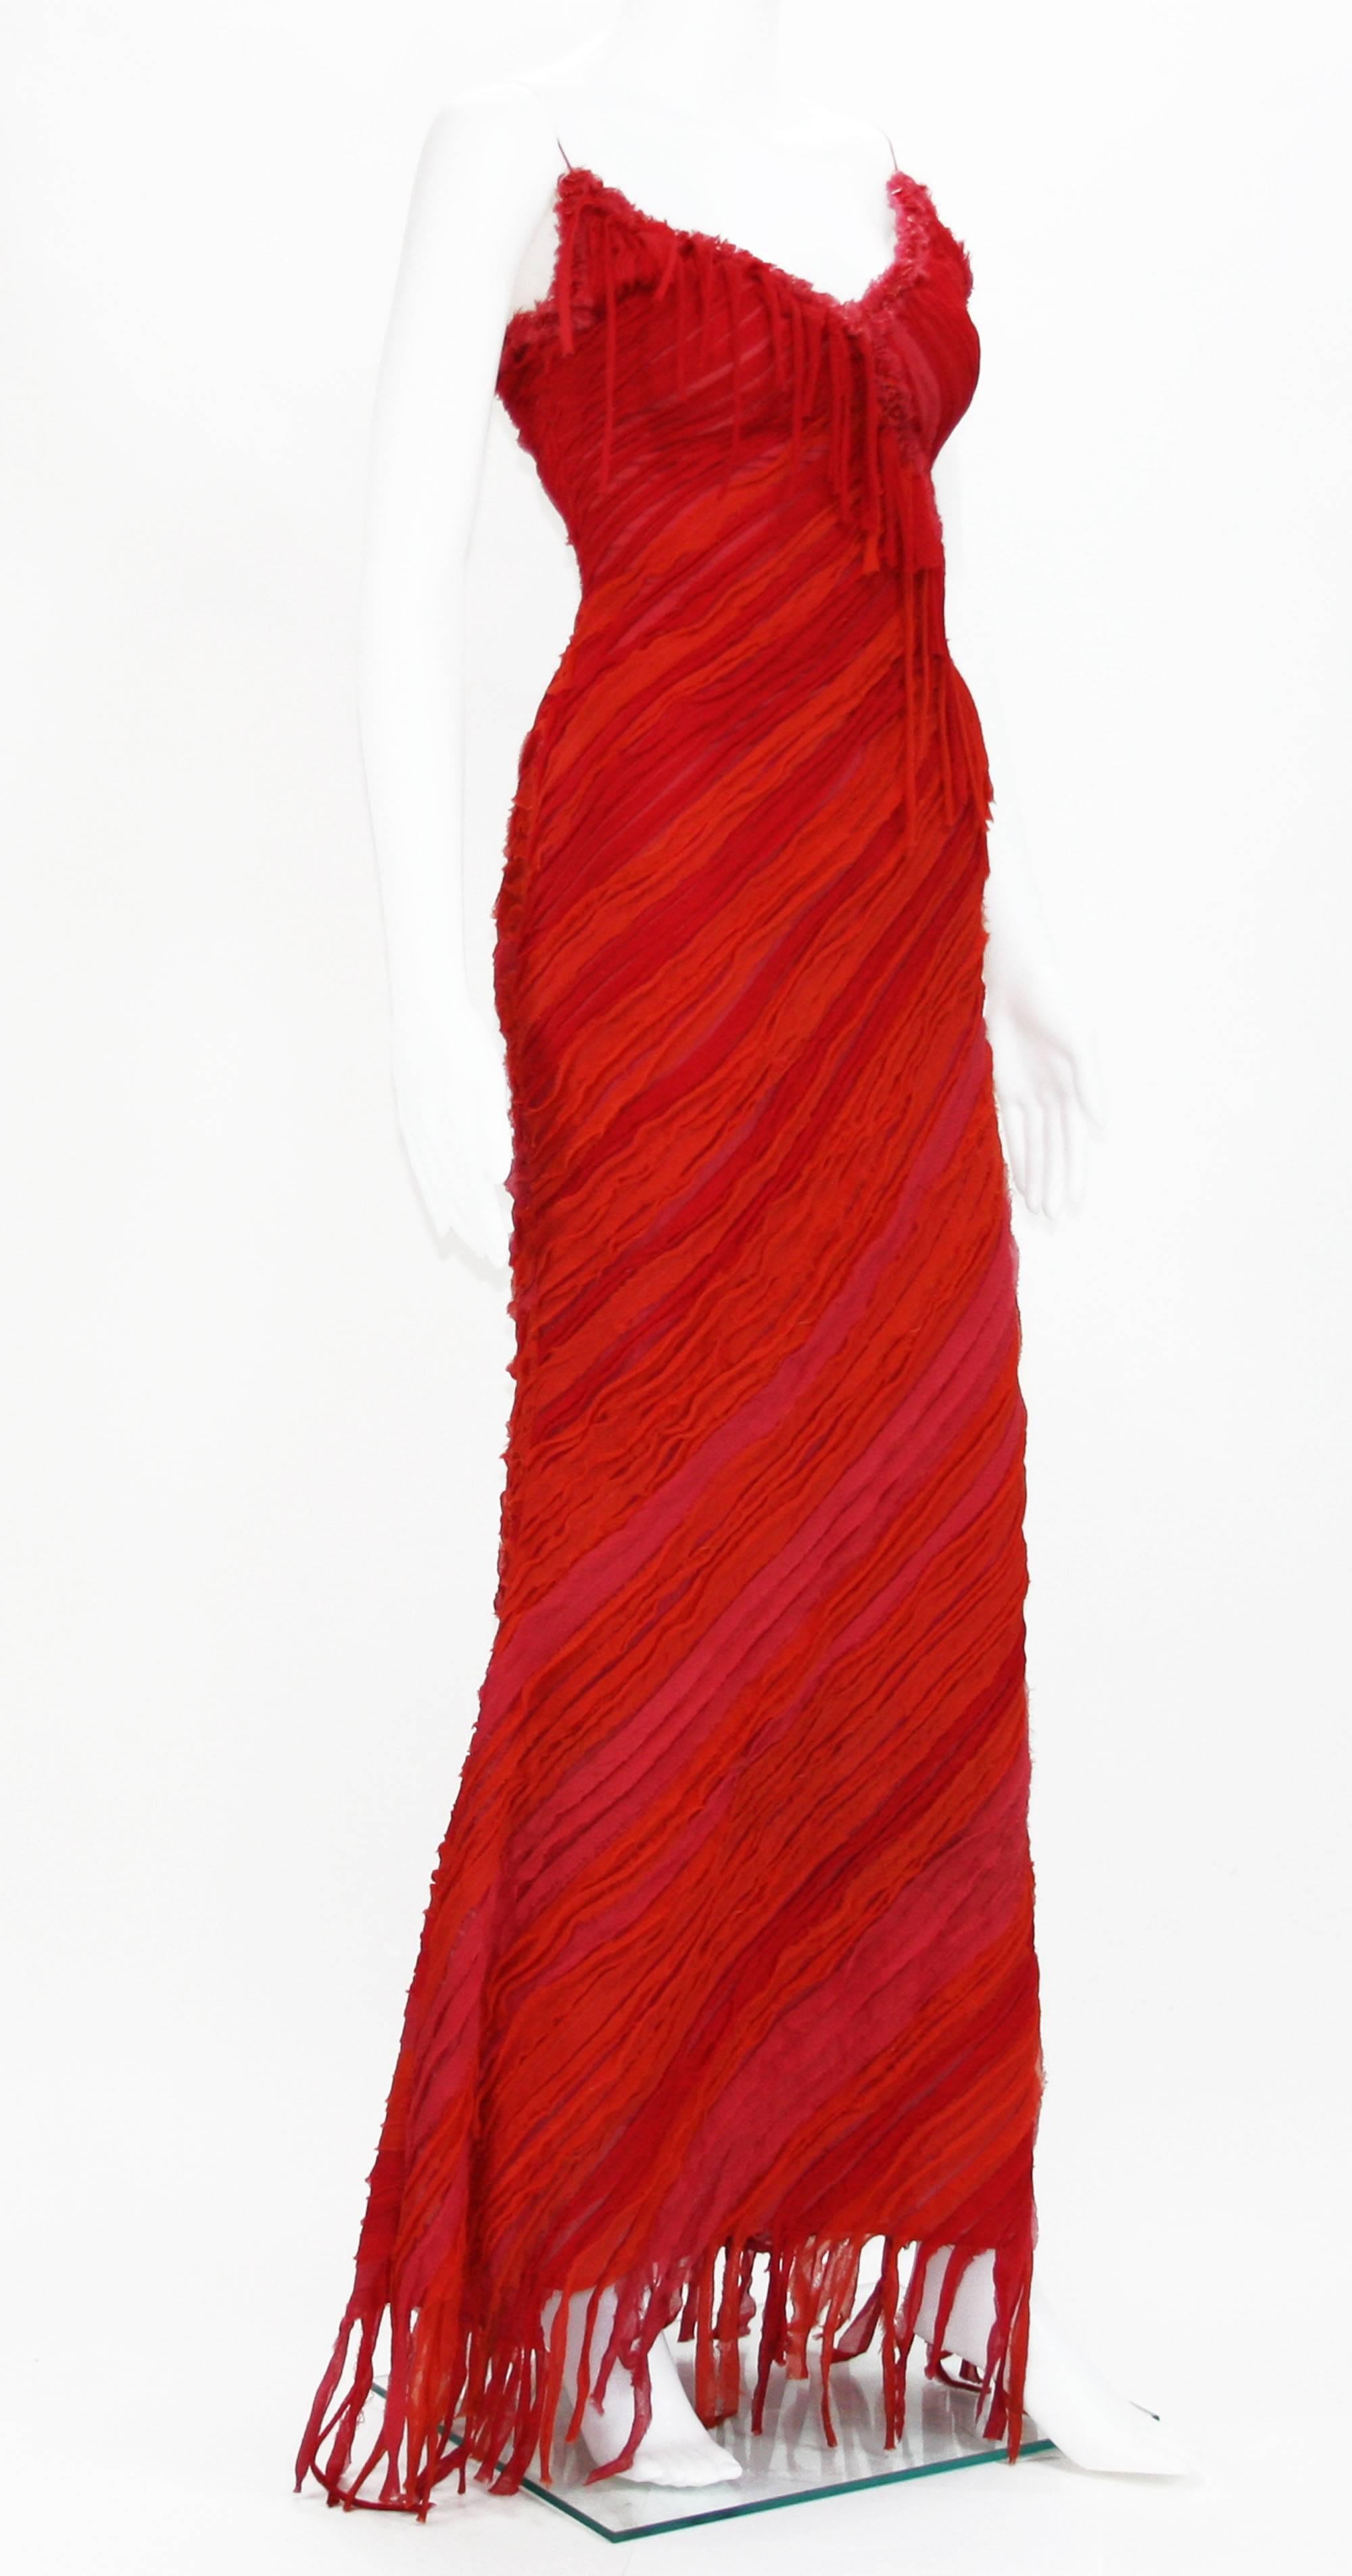 Naeem Khan Red Embellished Long Dress 
100% Pure Silk
Size 6
Colors - Red, Orange, Fuchsia.
Distressed Look.
Red Coral Embroidery.
Back side zipper.
Fully Lined.
Measurements Flat: Length - 56 Inches + 5